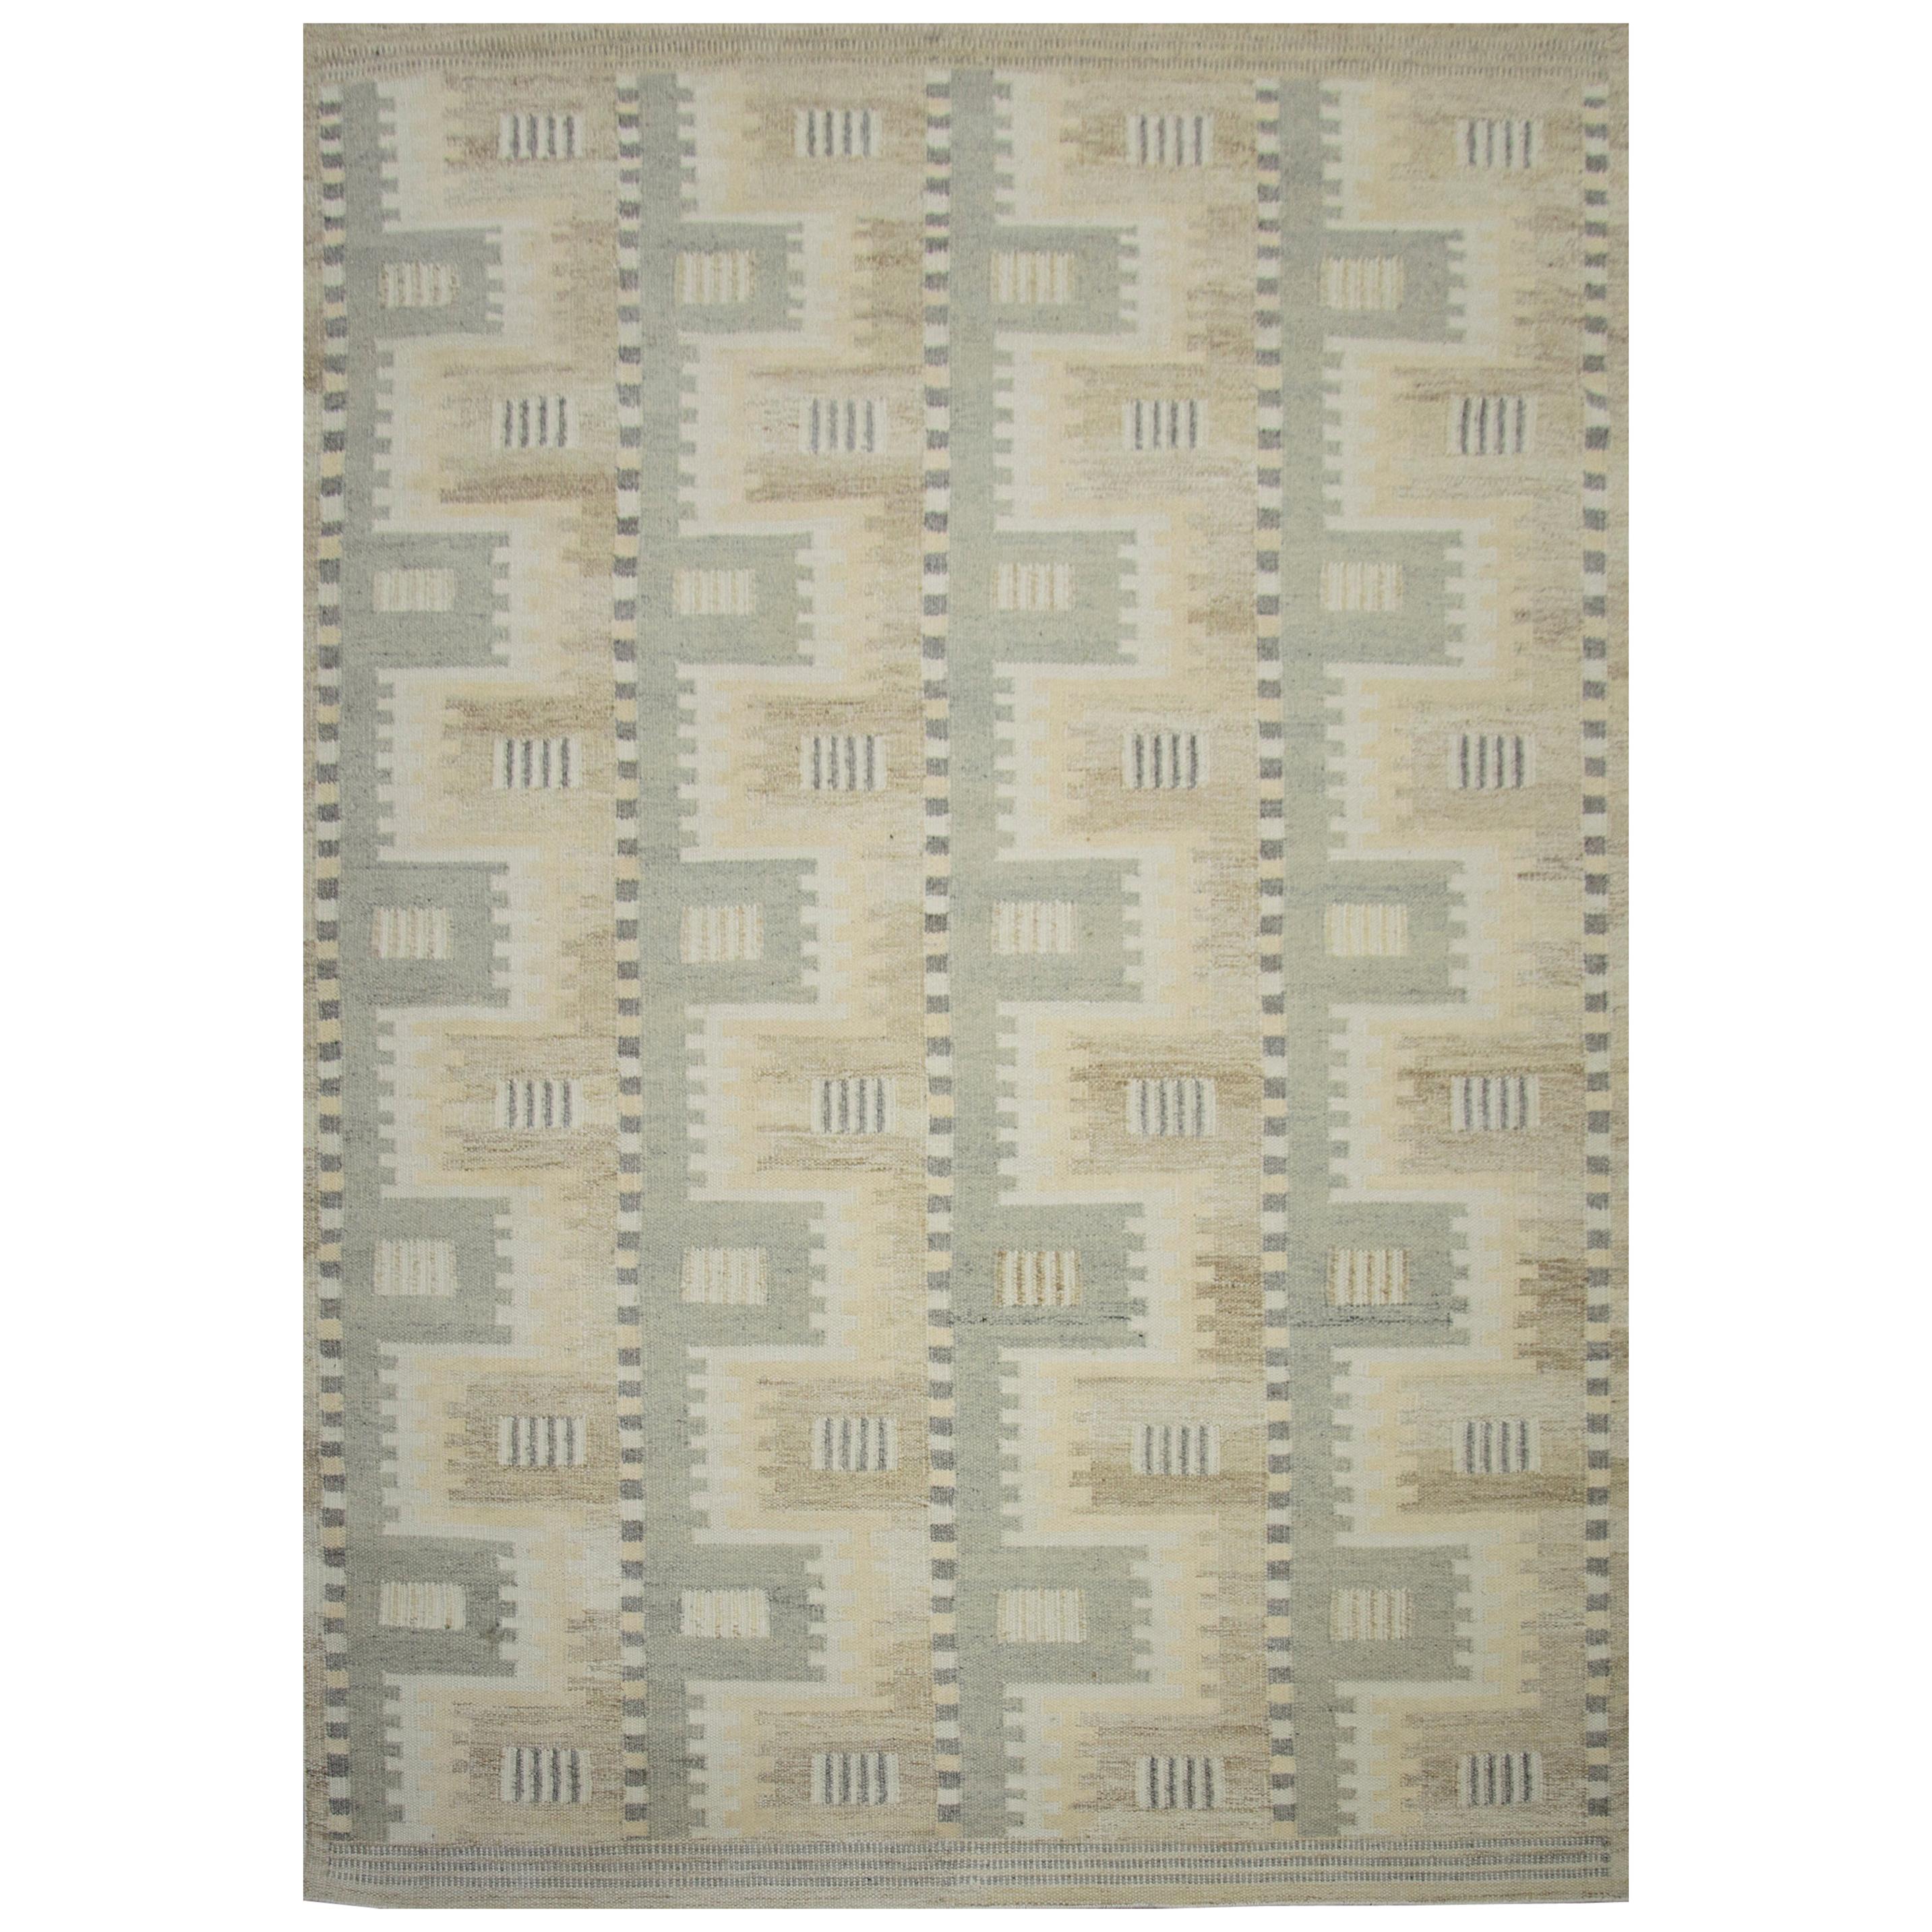 Modern Scandinavian Rug with Ivory and Gray Geometric Patterns